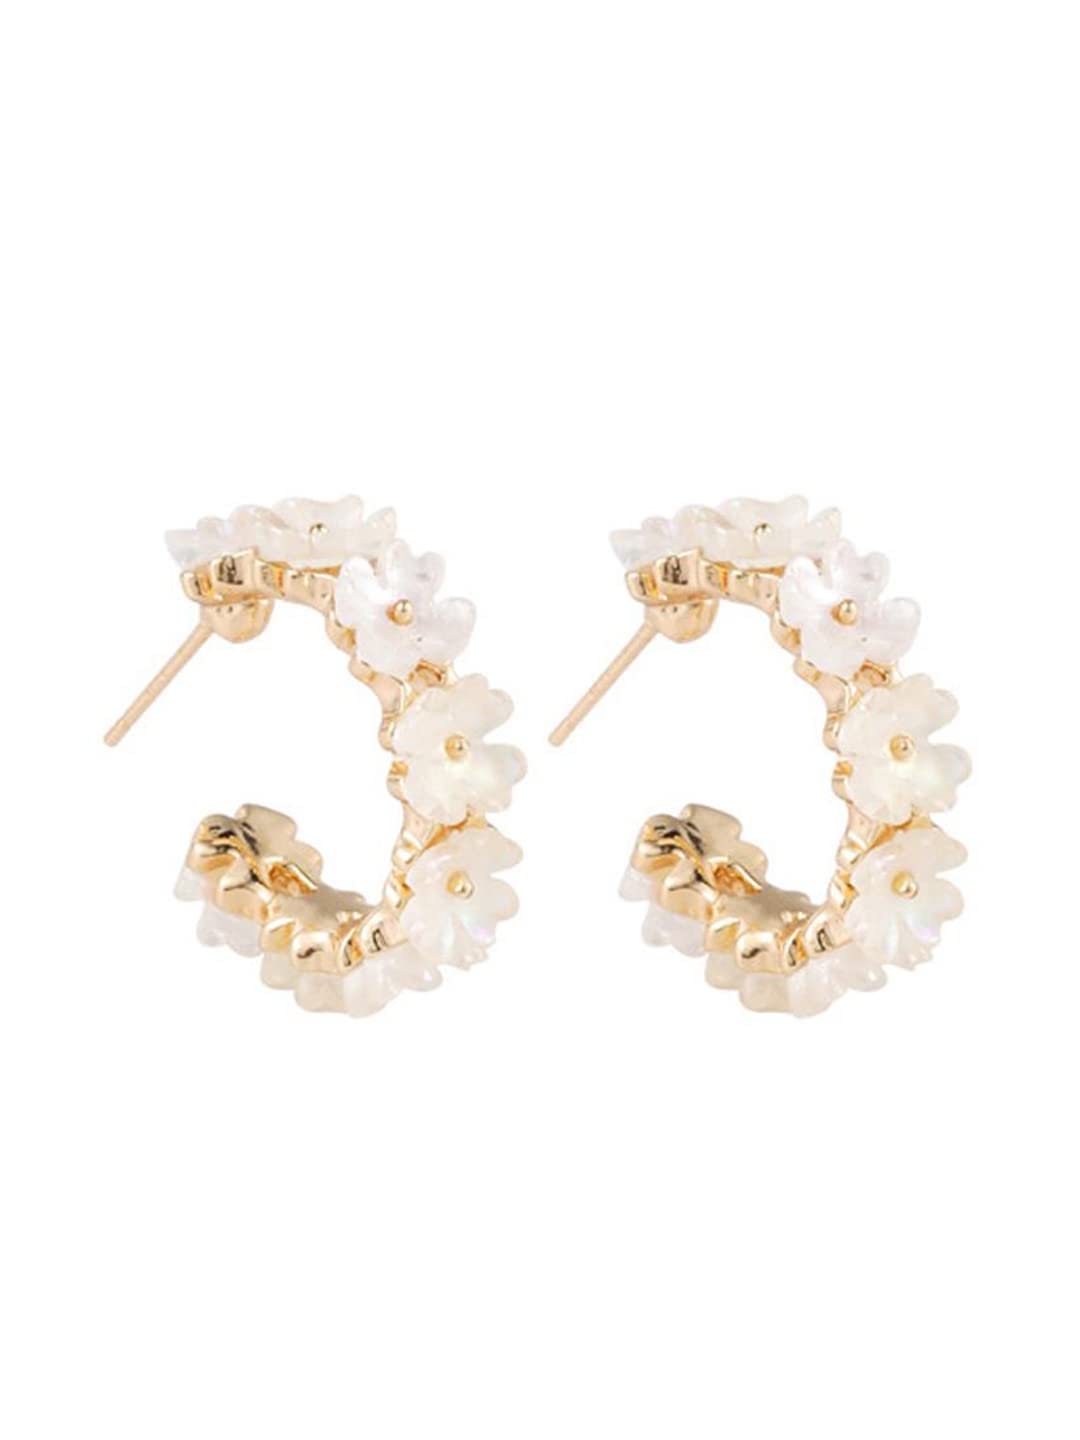 Yellow Chimes Earrings For Women Gold Tone Floral designed Crystal Studded Half Bali Clip On Hoop Earrings For Women and Girls